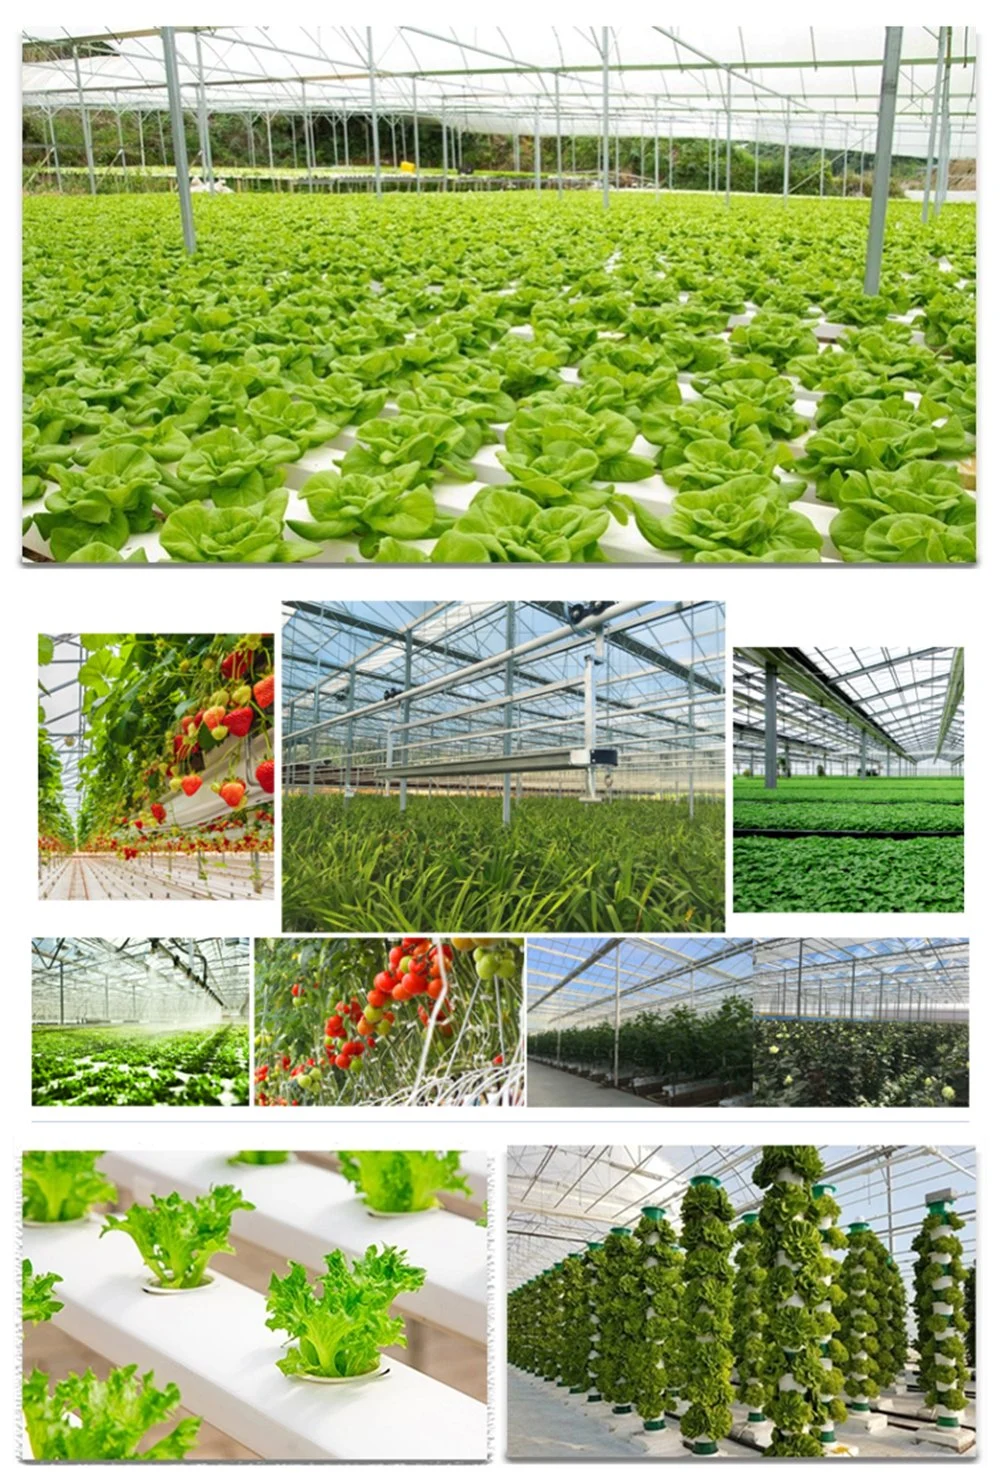 PC Sheet Greenhouse with Hydroponics Systems for Agriculture Growing Tomato/Cucumber/Lettuce/Mushroom